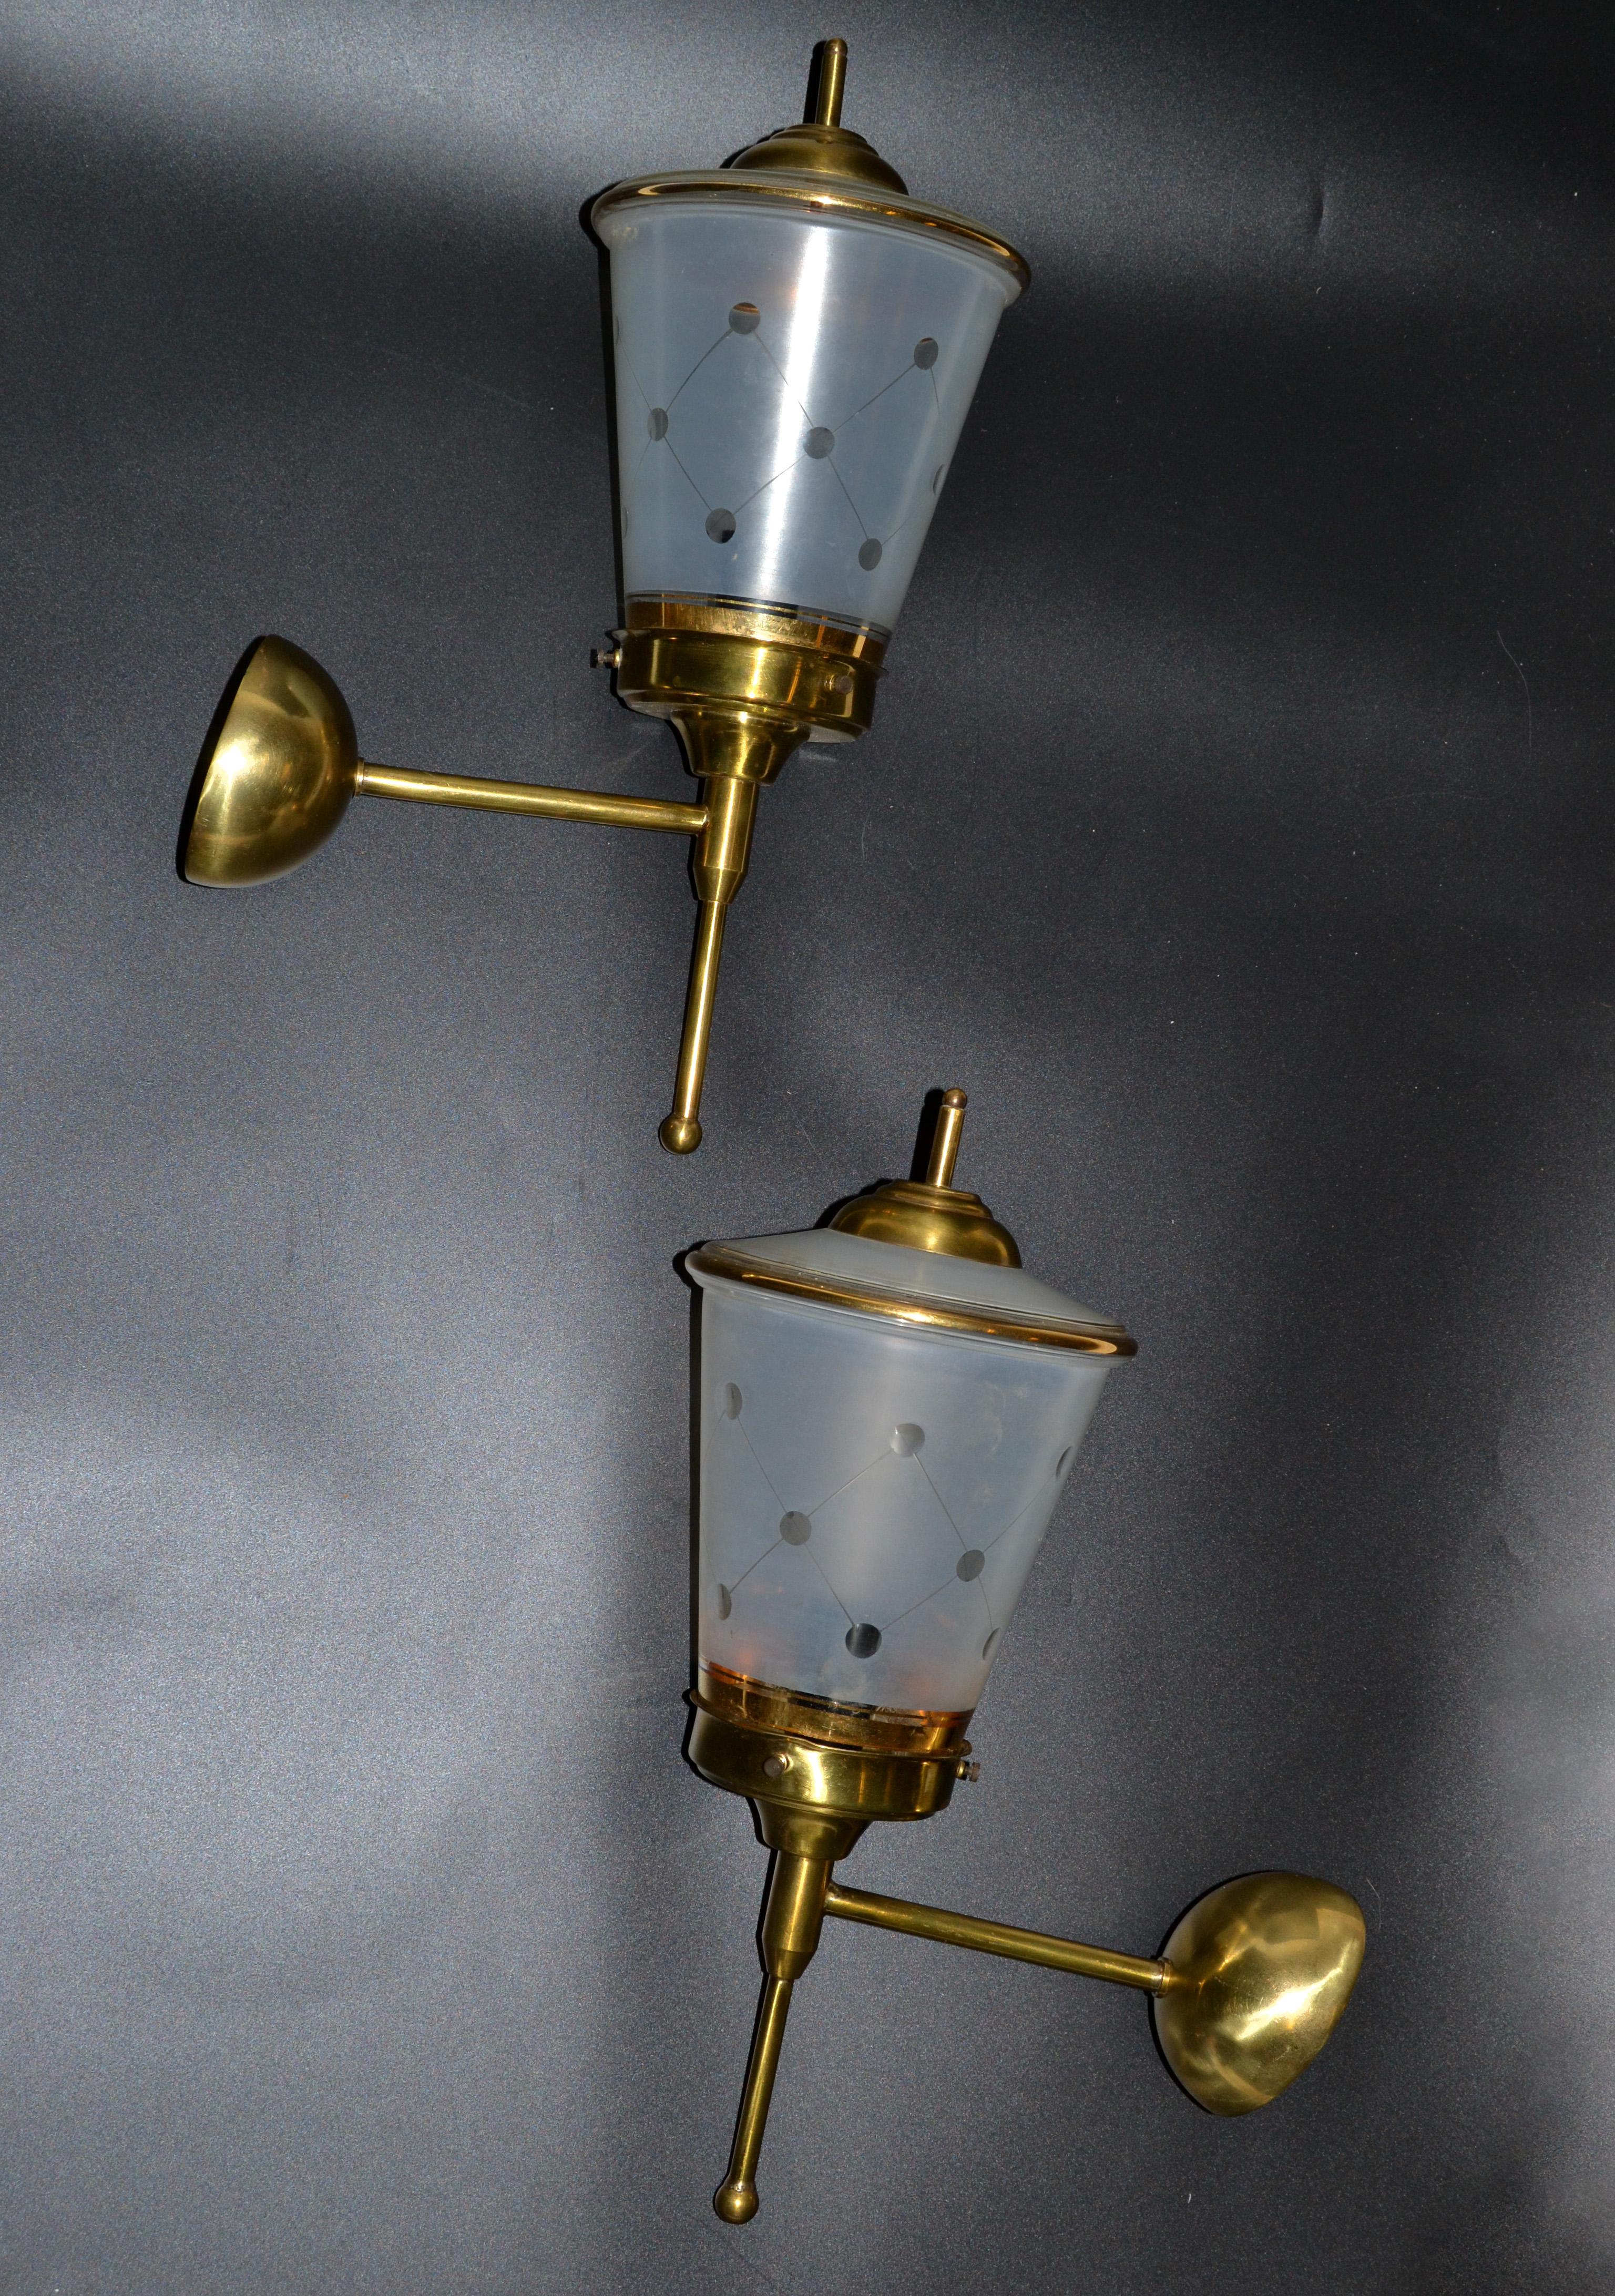 Maison Lunel Pair of Ornate Glass and Brass Lantern Wall Mounted Sconces, France In Good Condition For Sale In Miami, FL